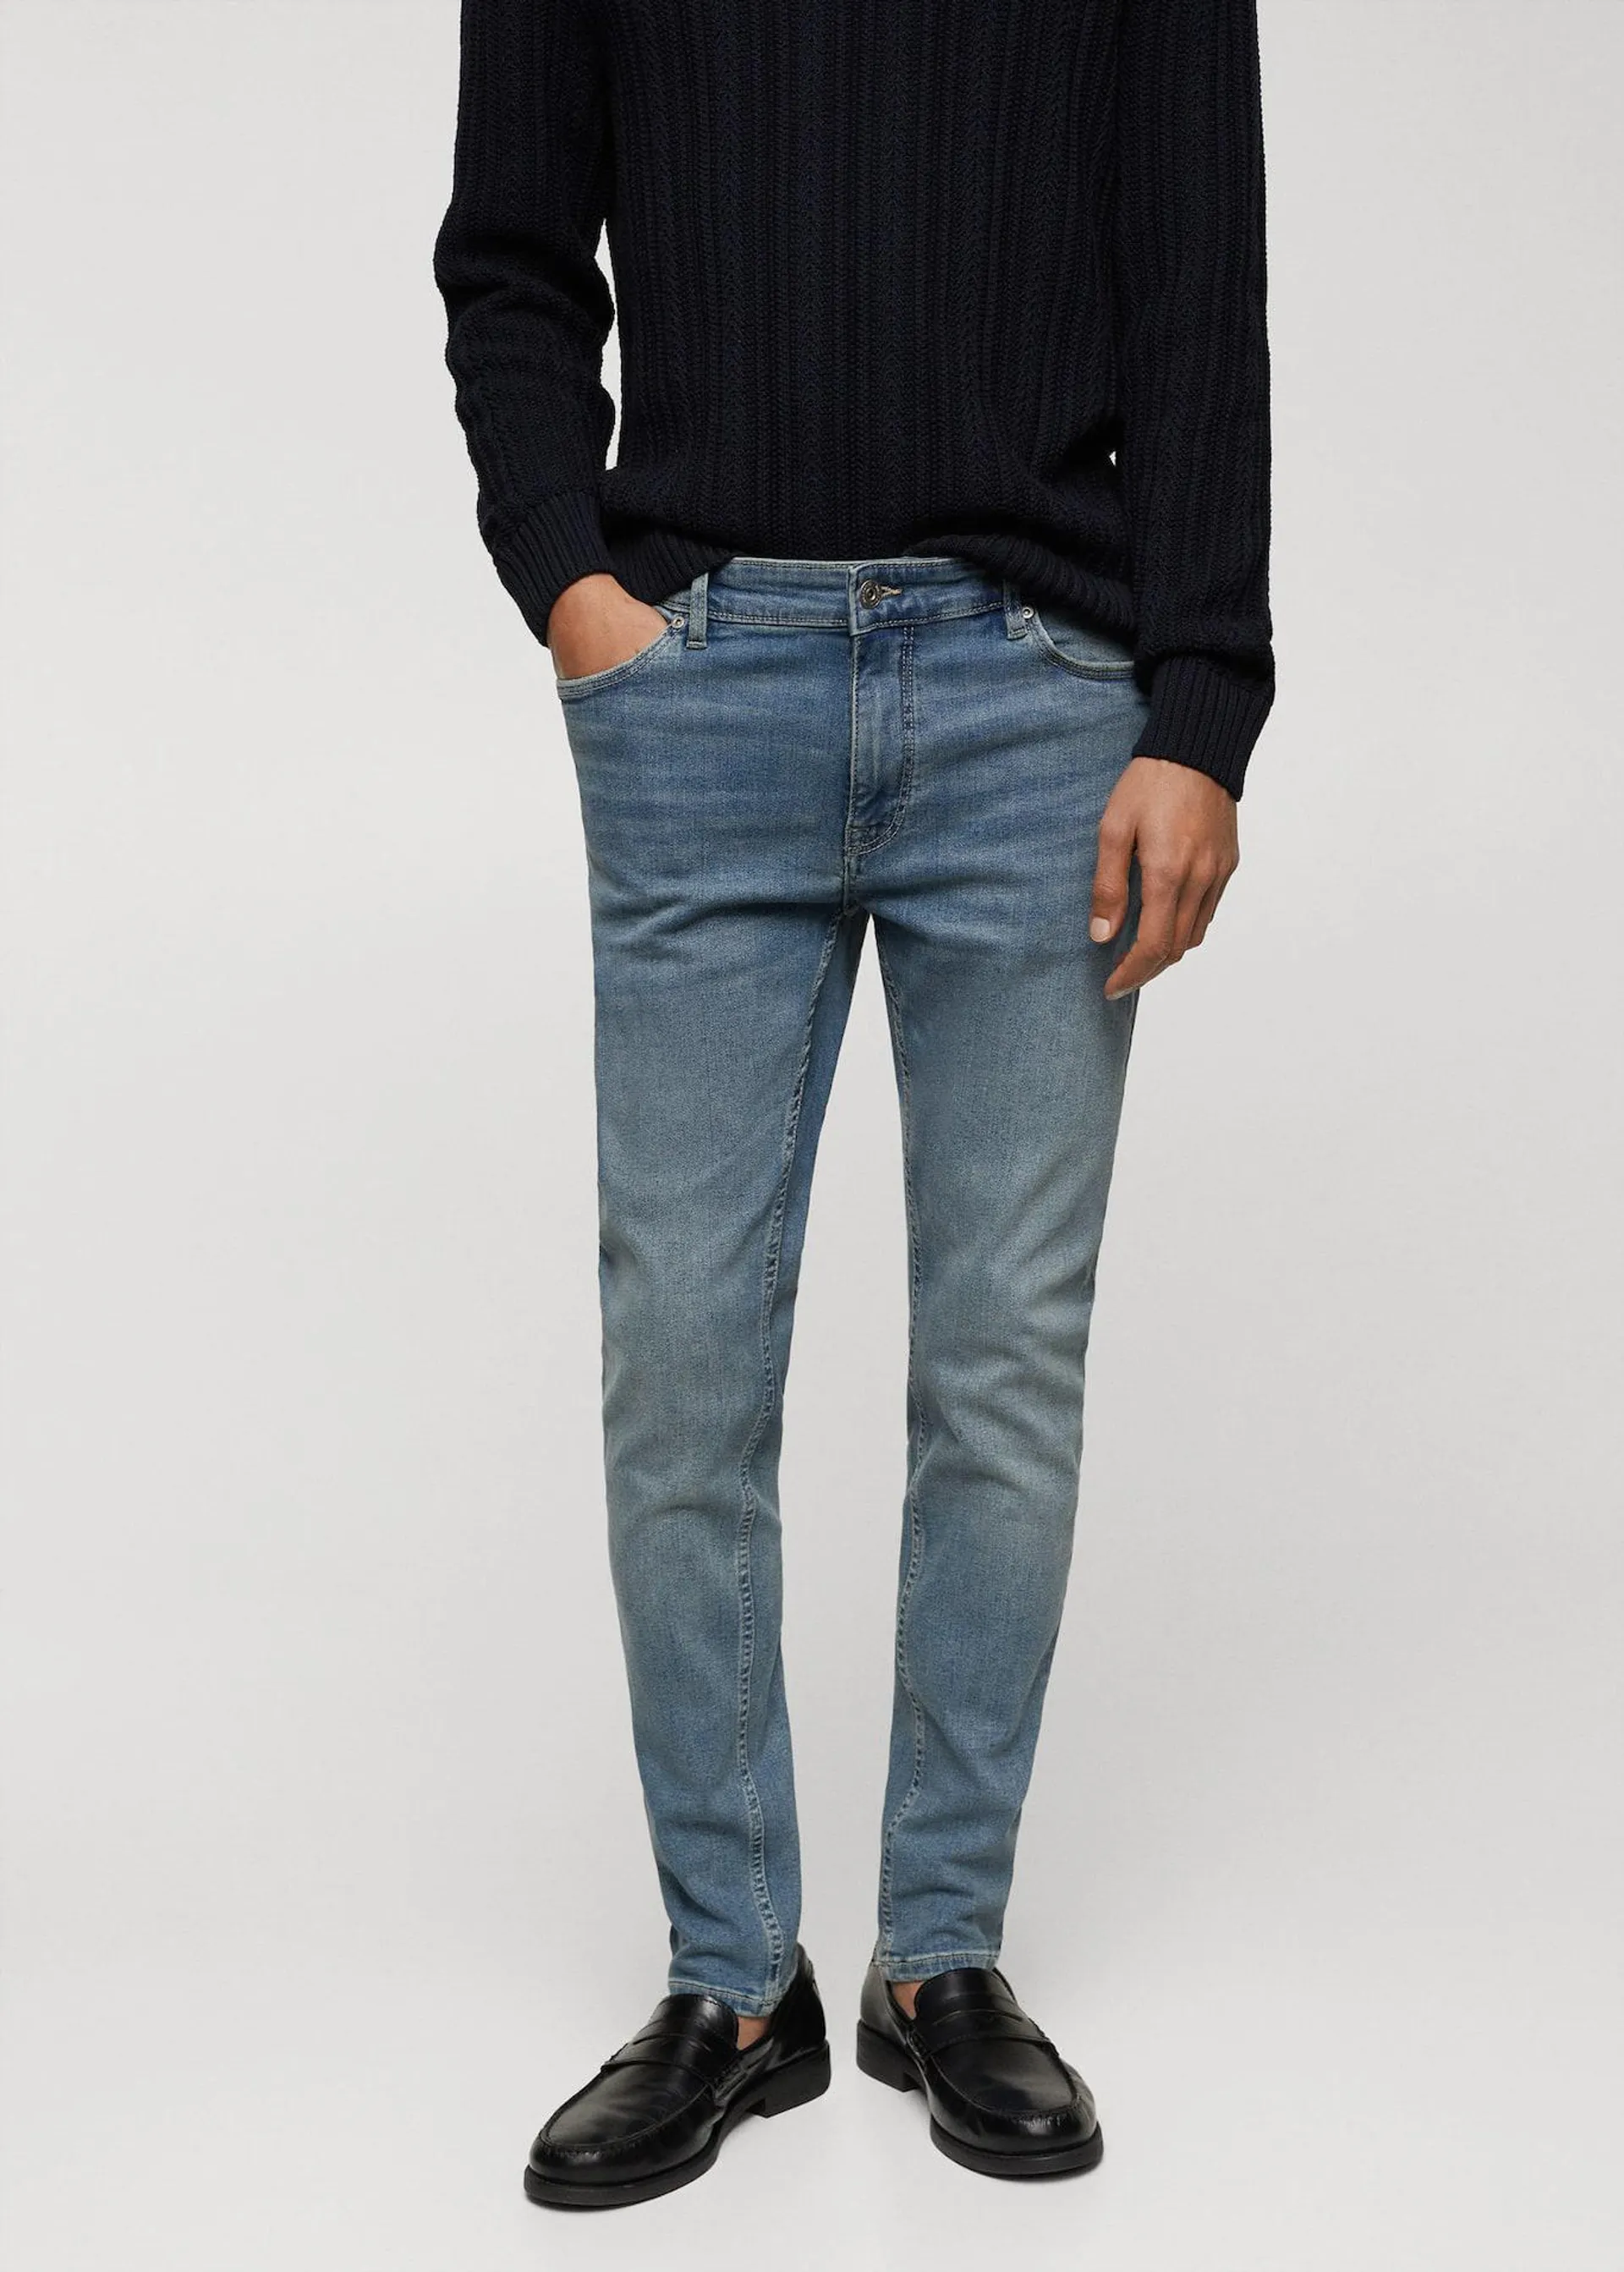 Jude skinny-fit jeans